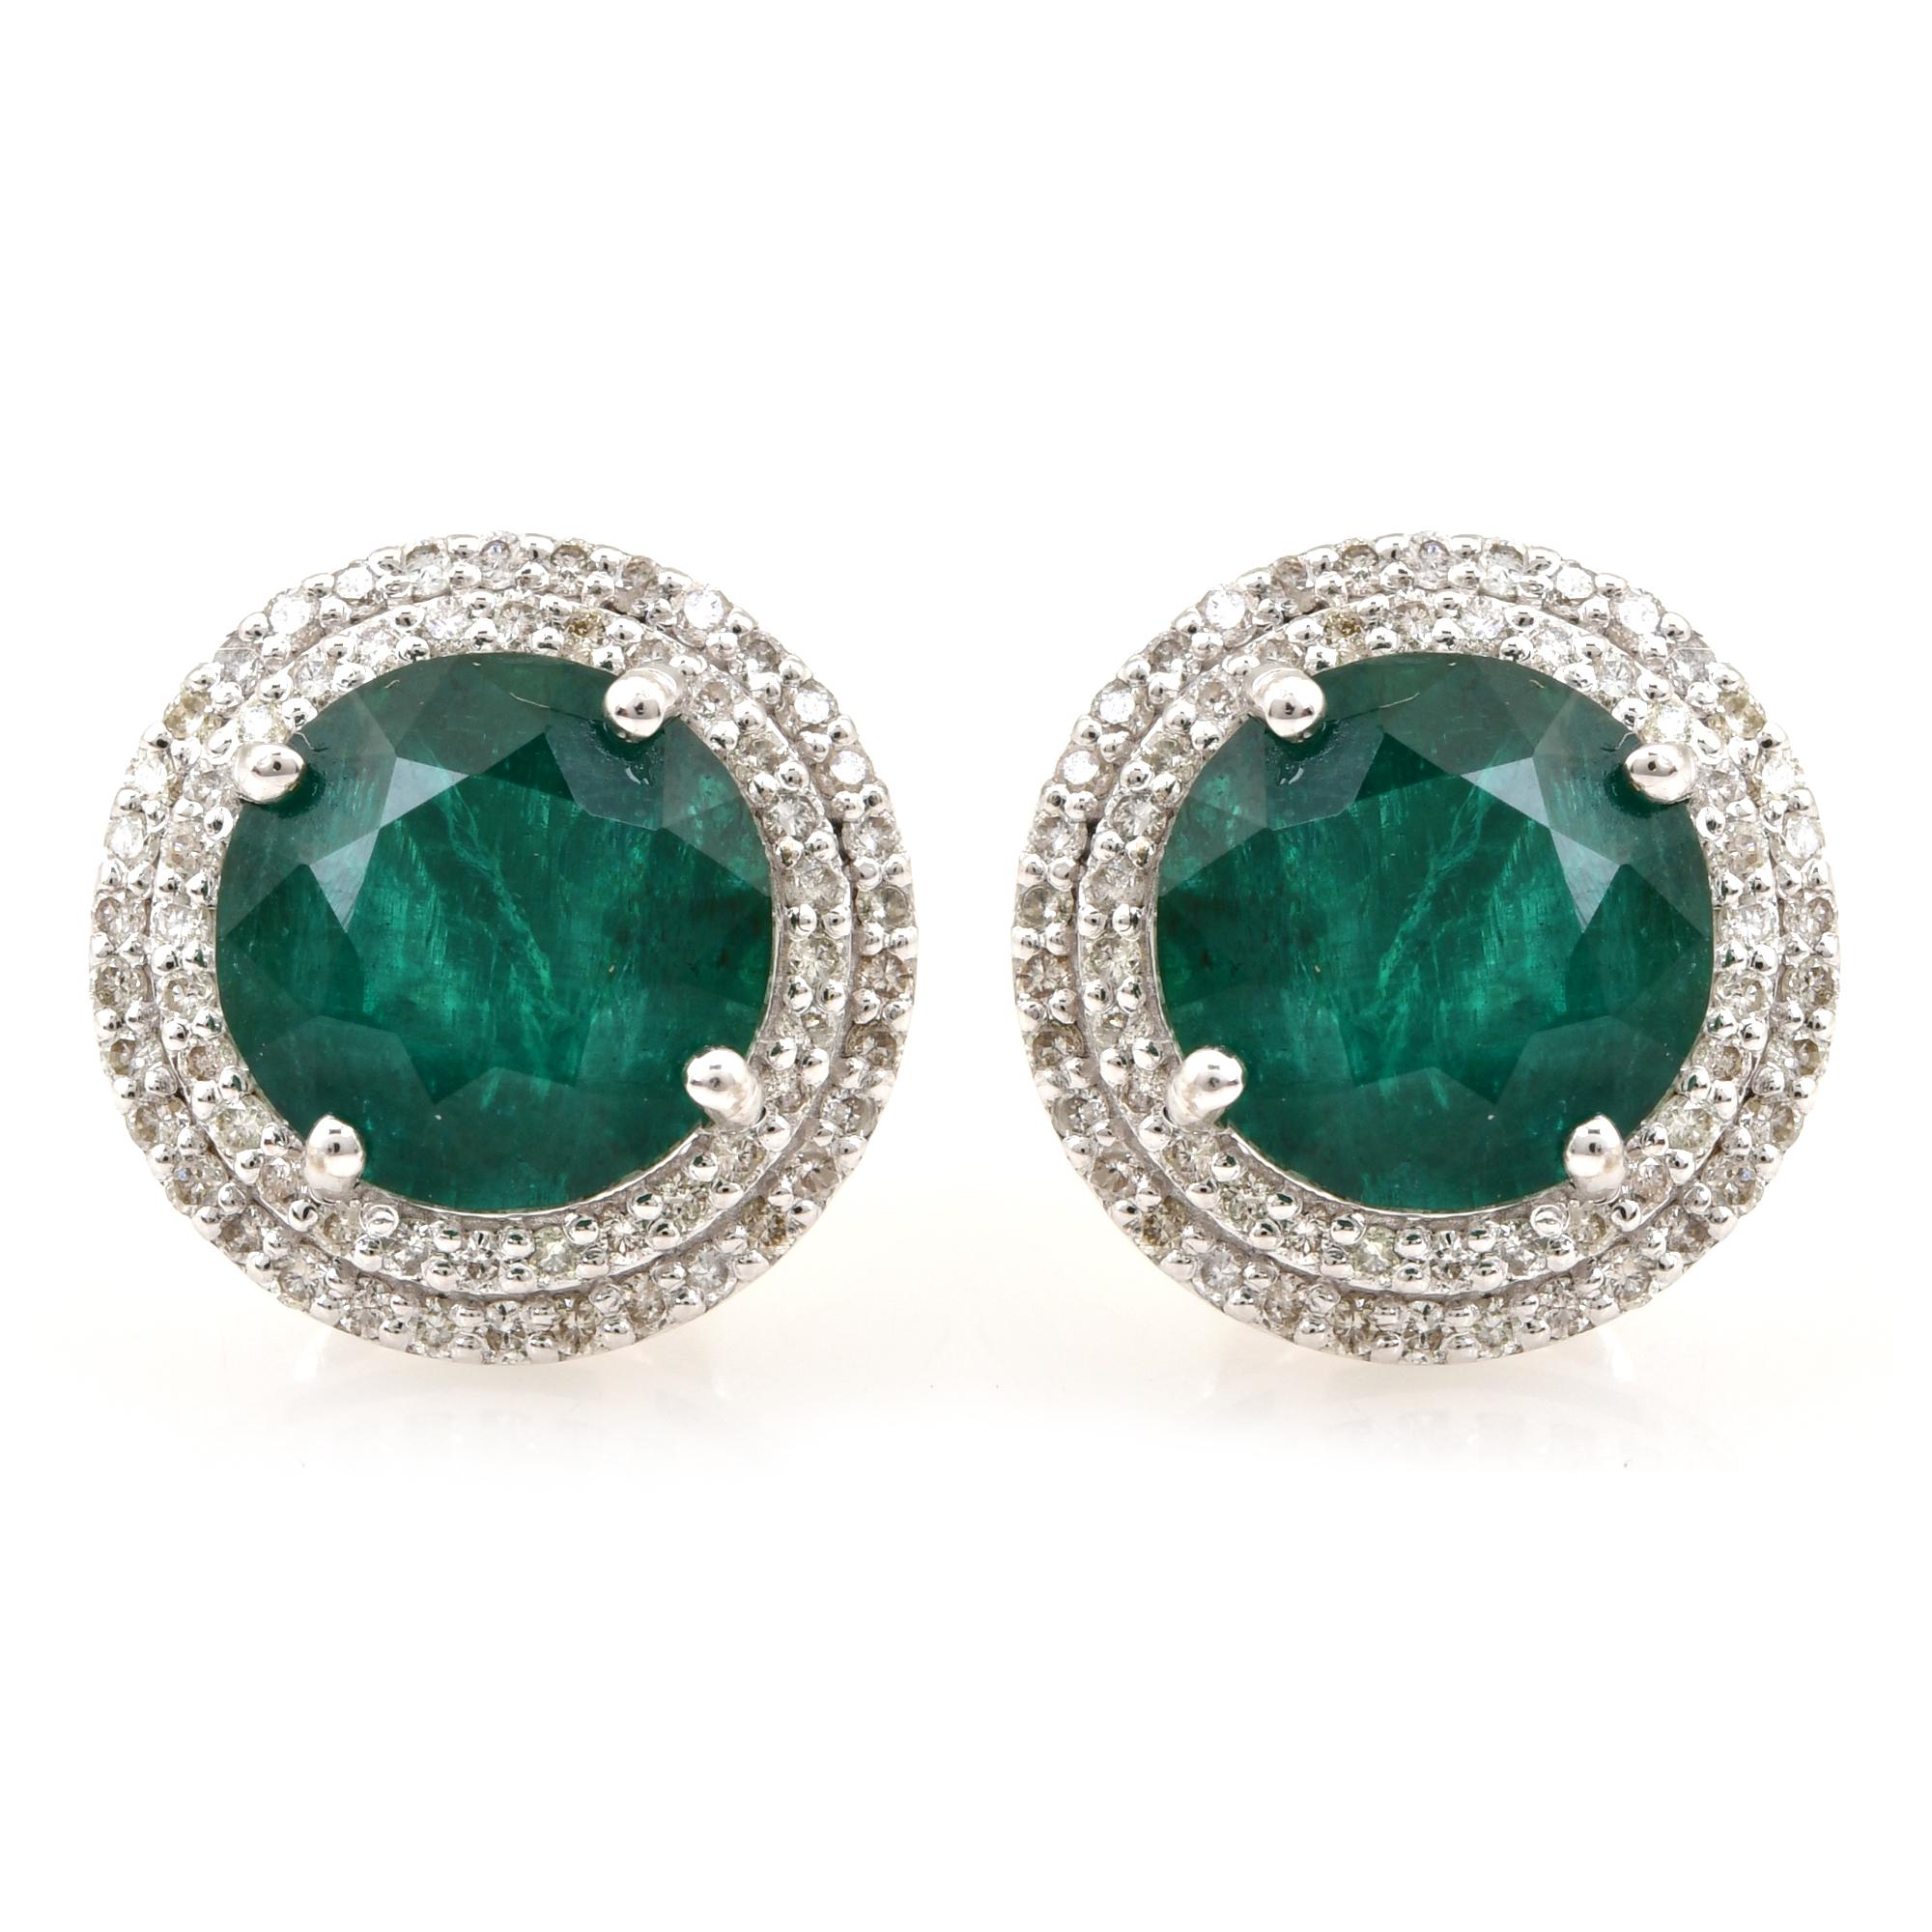 Women's Natural Emerald Gemstone Stud Earrings Diamond Pave Solid 18k White Gold Jewelry For Sale